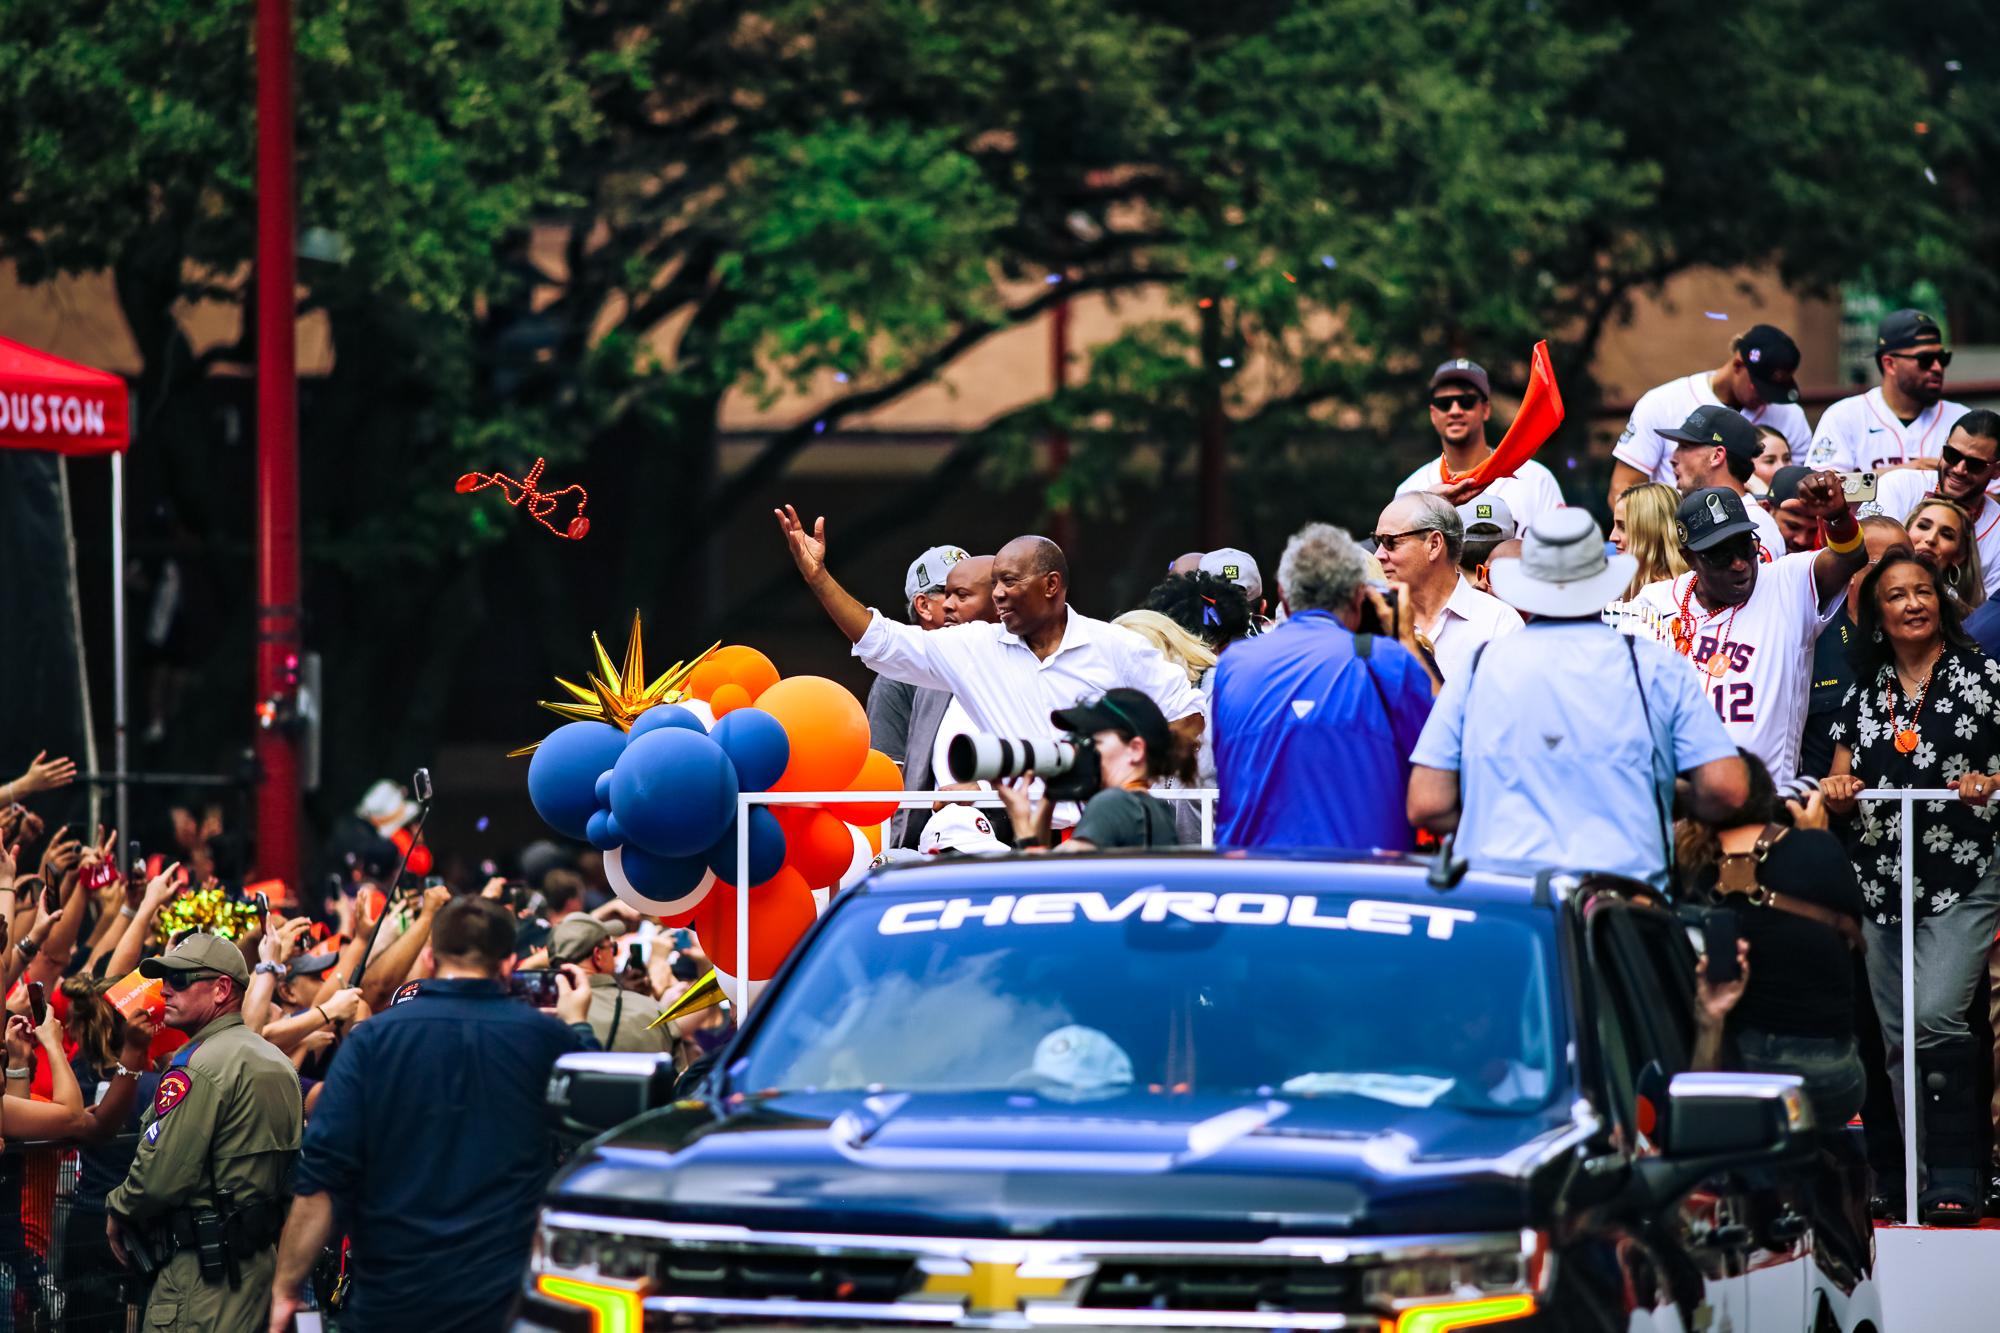 Today was a great day to be a Houstonian': Mayor Turner thanks Houston for  successful Astros World Series Championship parade